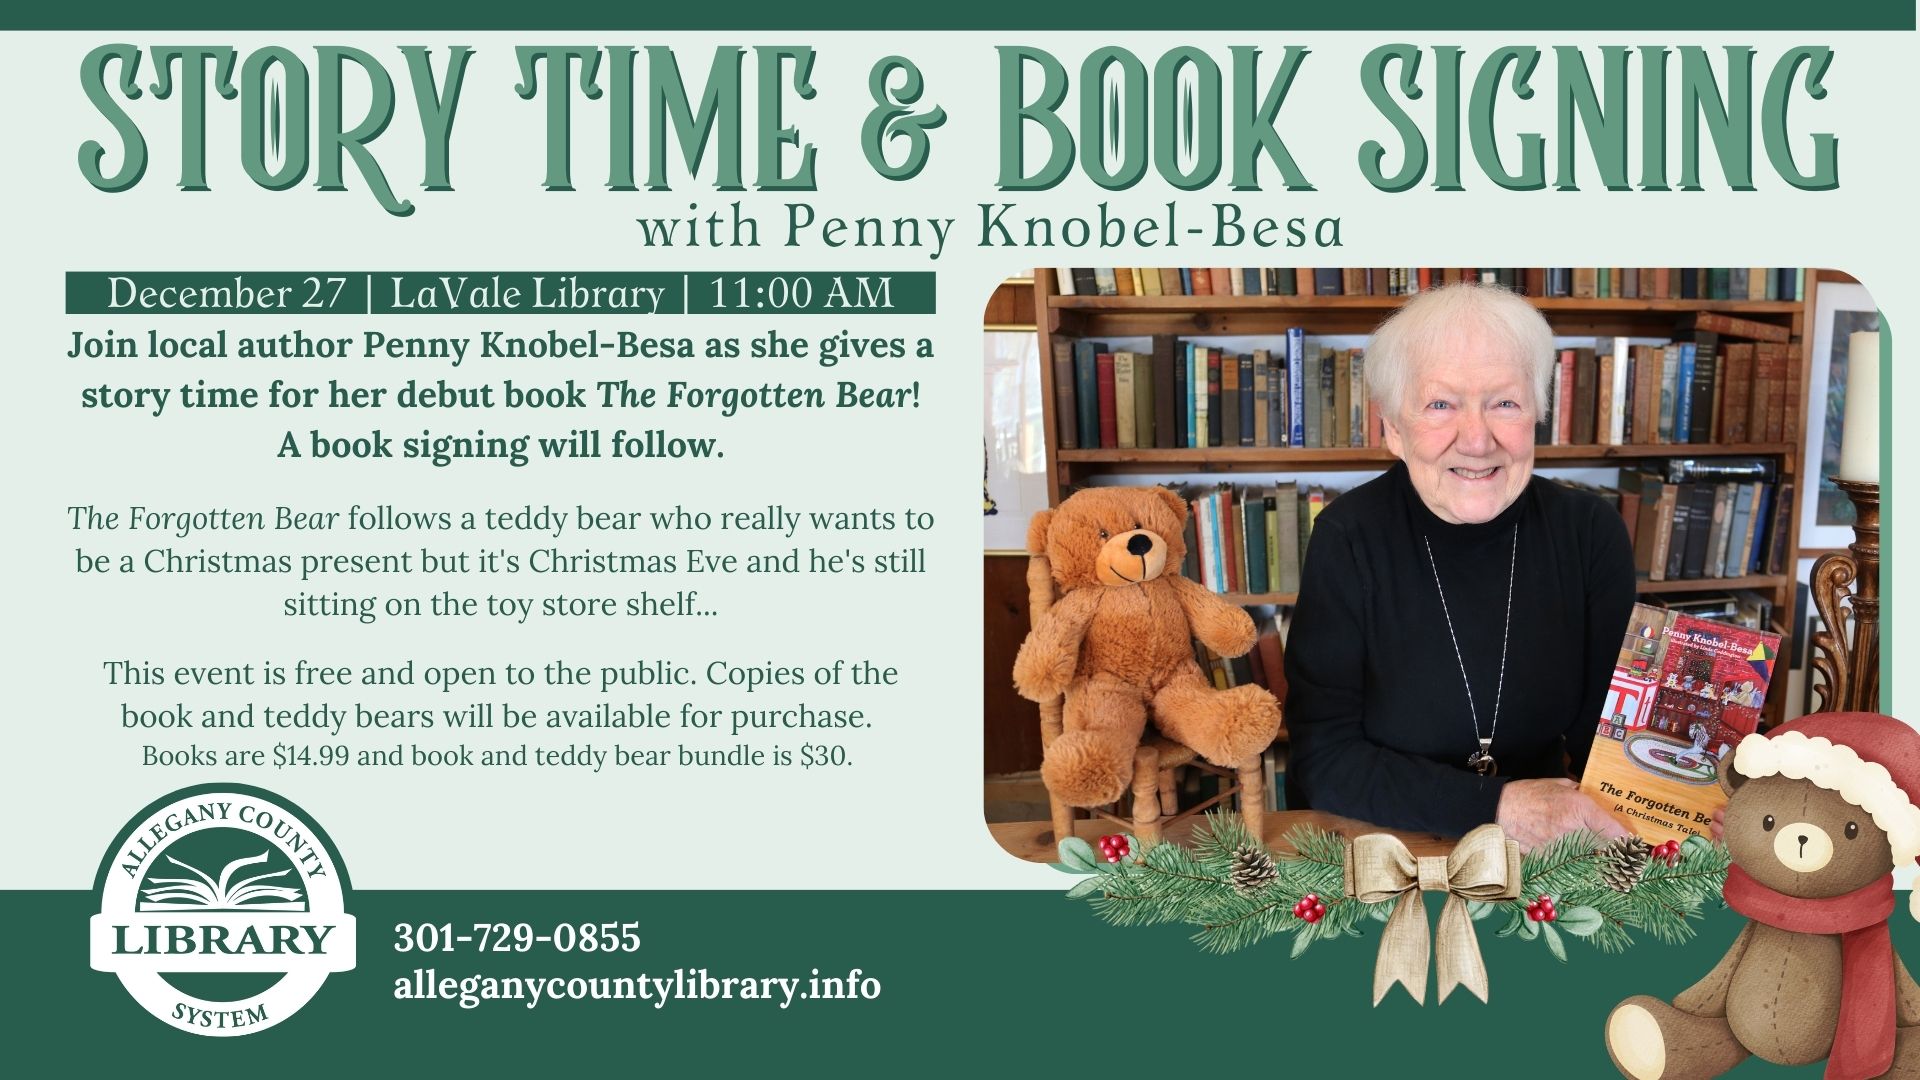 Photo of author with book and teddy bear.  Description of program 